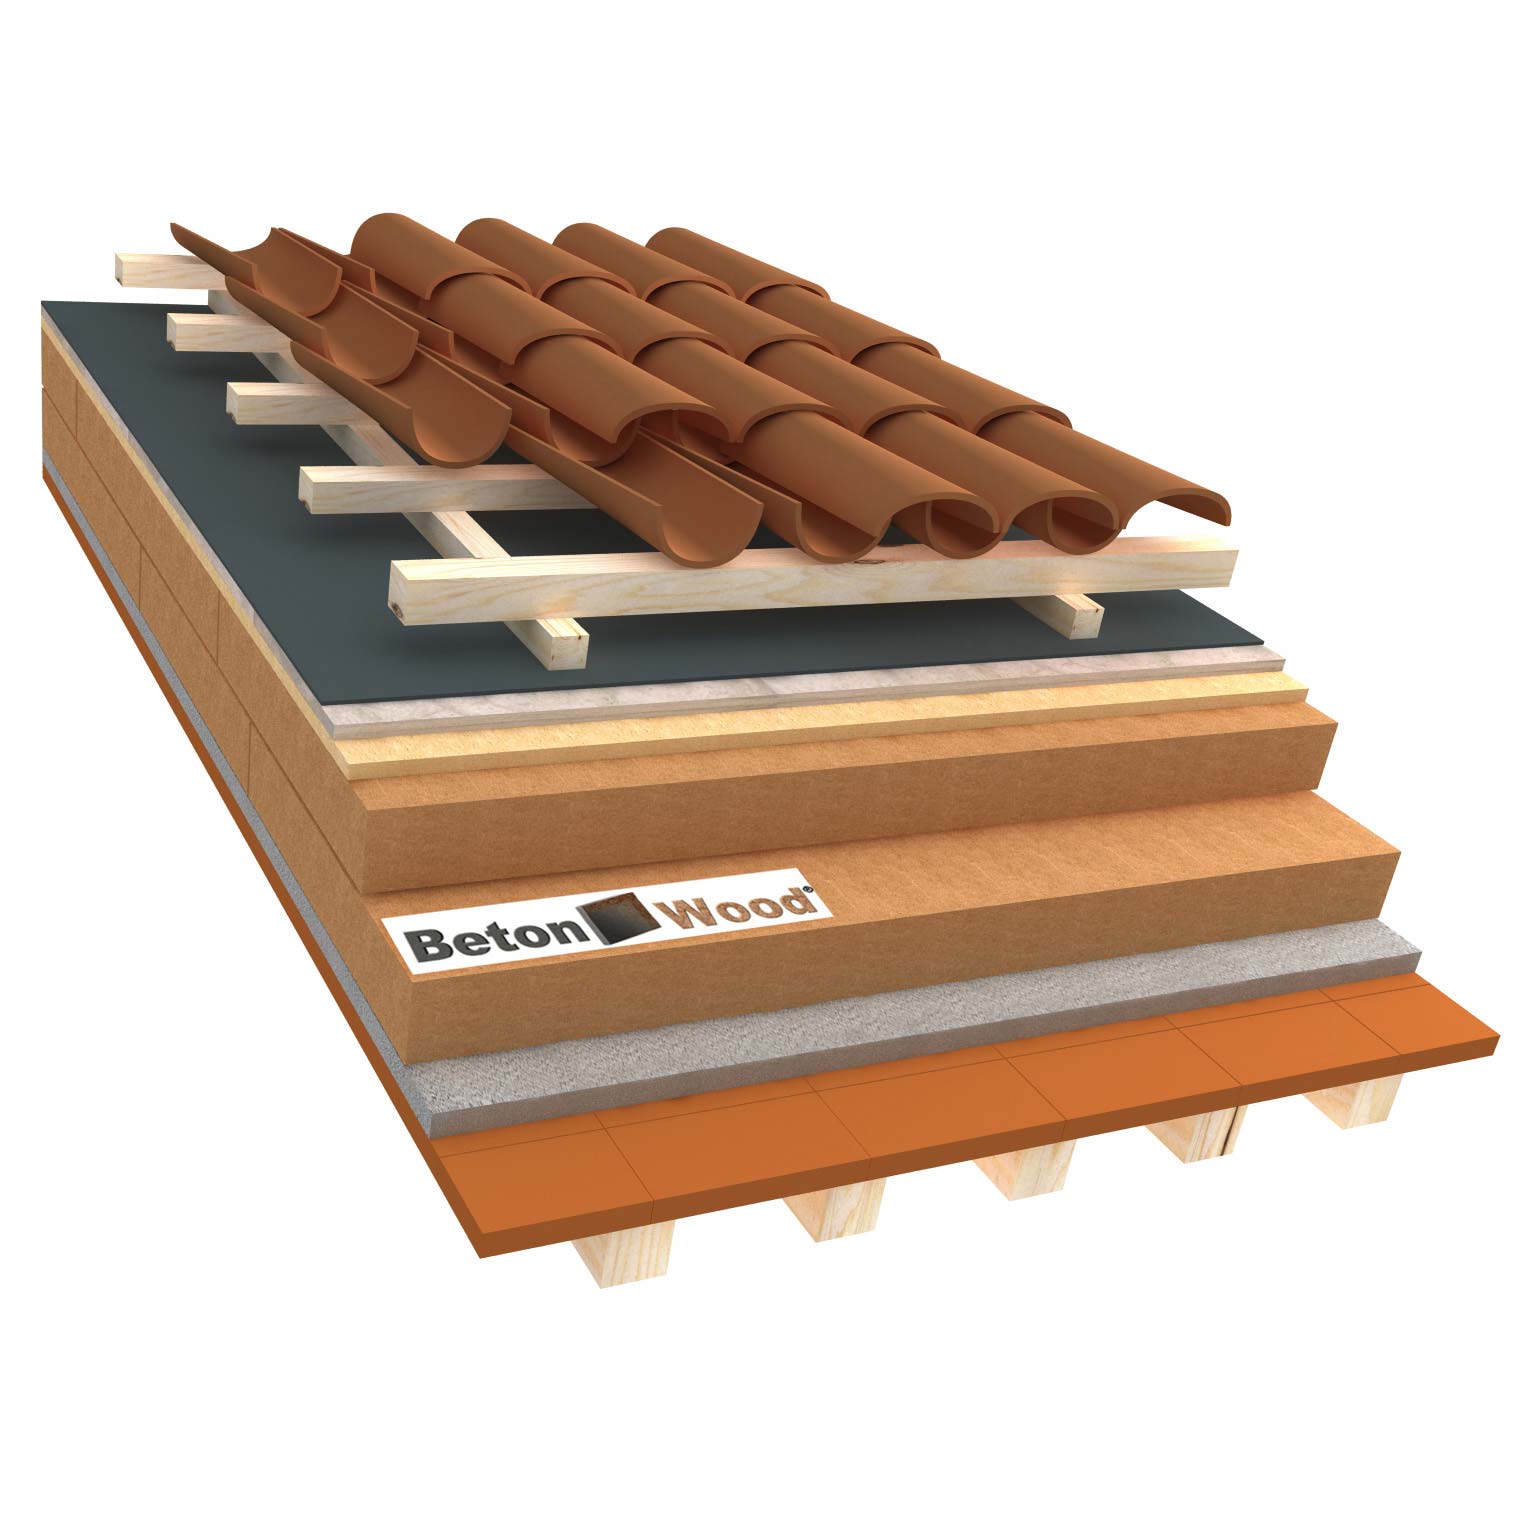 Ventilated roof with fiber wood Isorel, Special and cement bonded particle boards on terracotta tiles